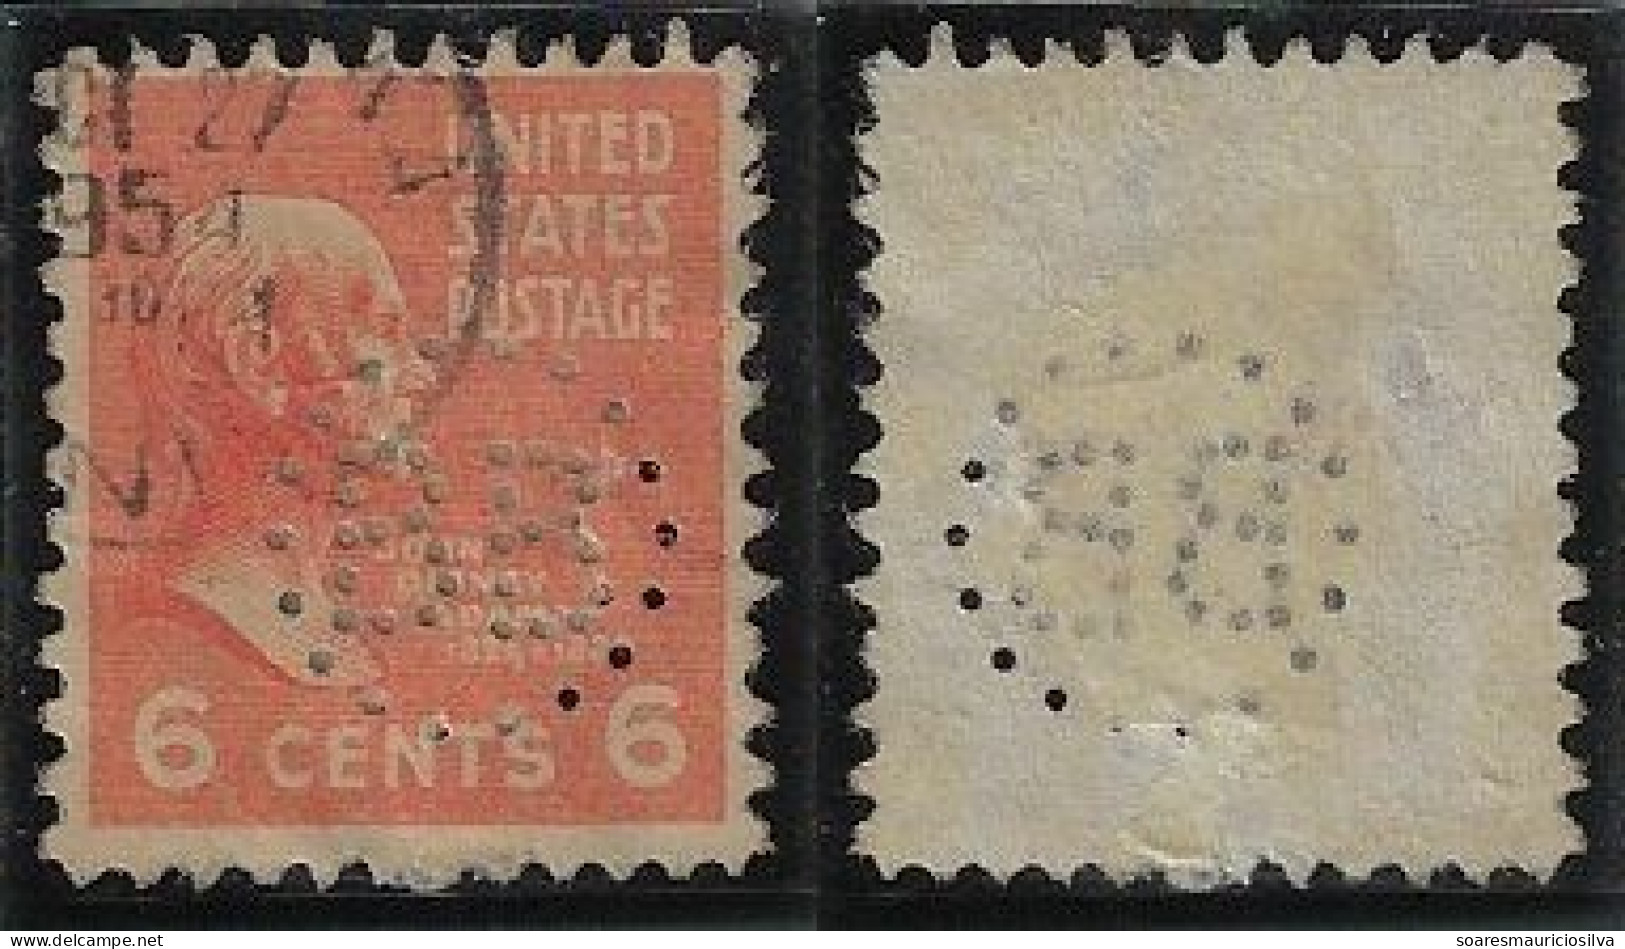 USA United States 1902/1954 Stamp With Perfin BB(Circle) By United States Rubber Company From Mishawaka Lochung Perfore - Perforados